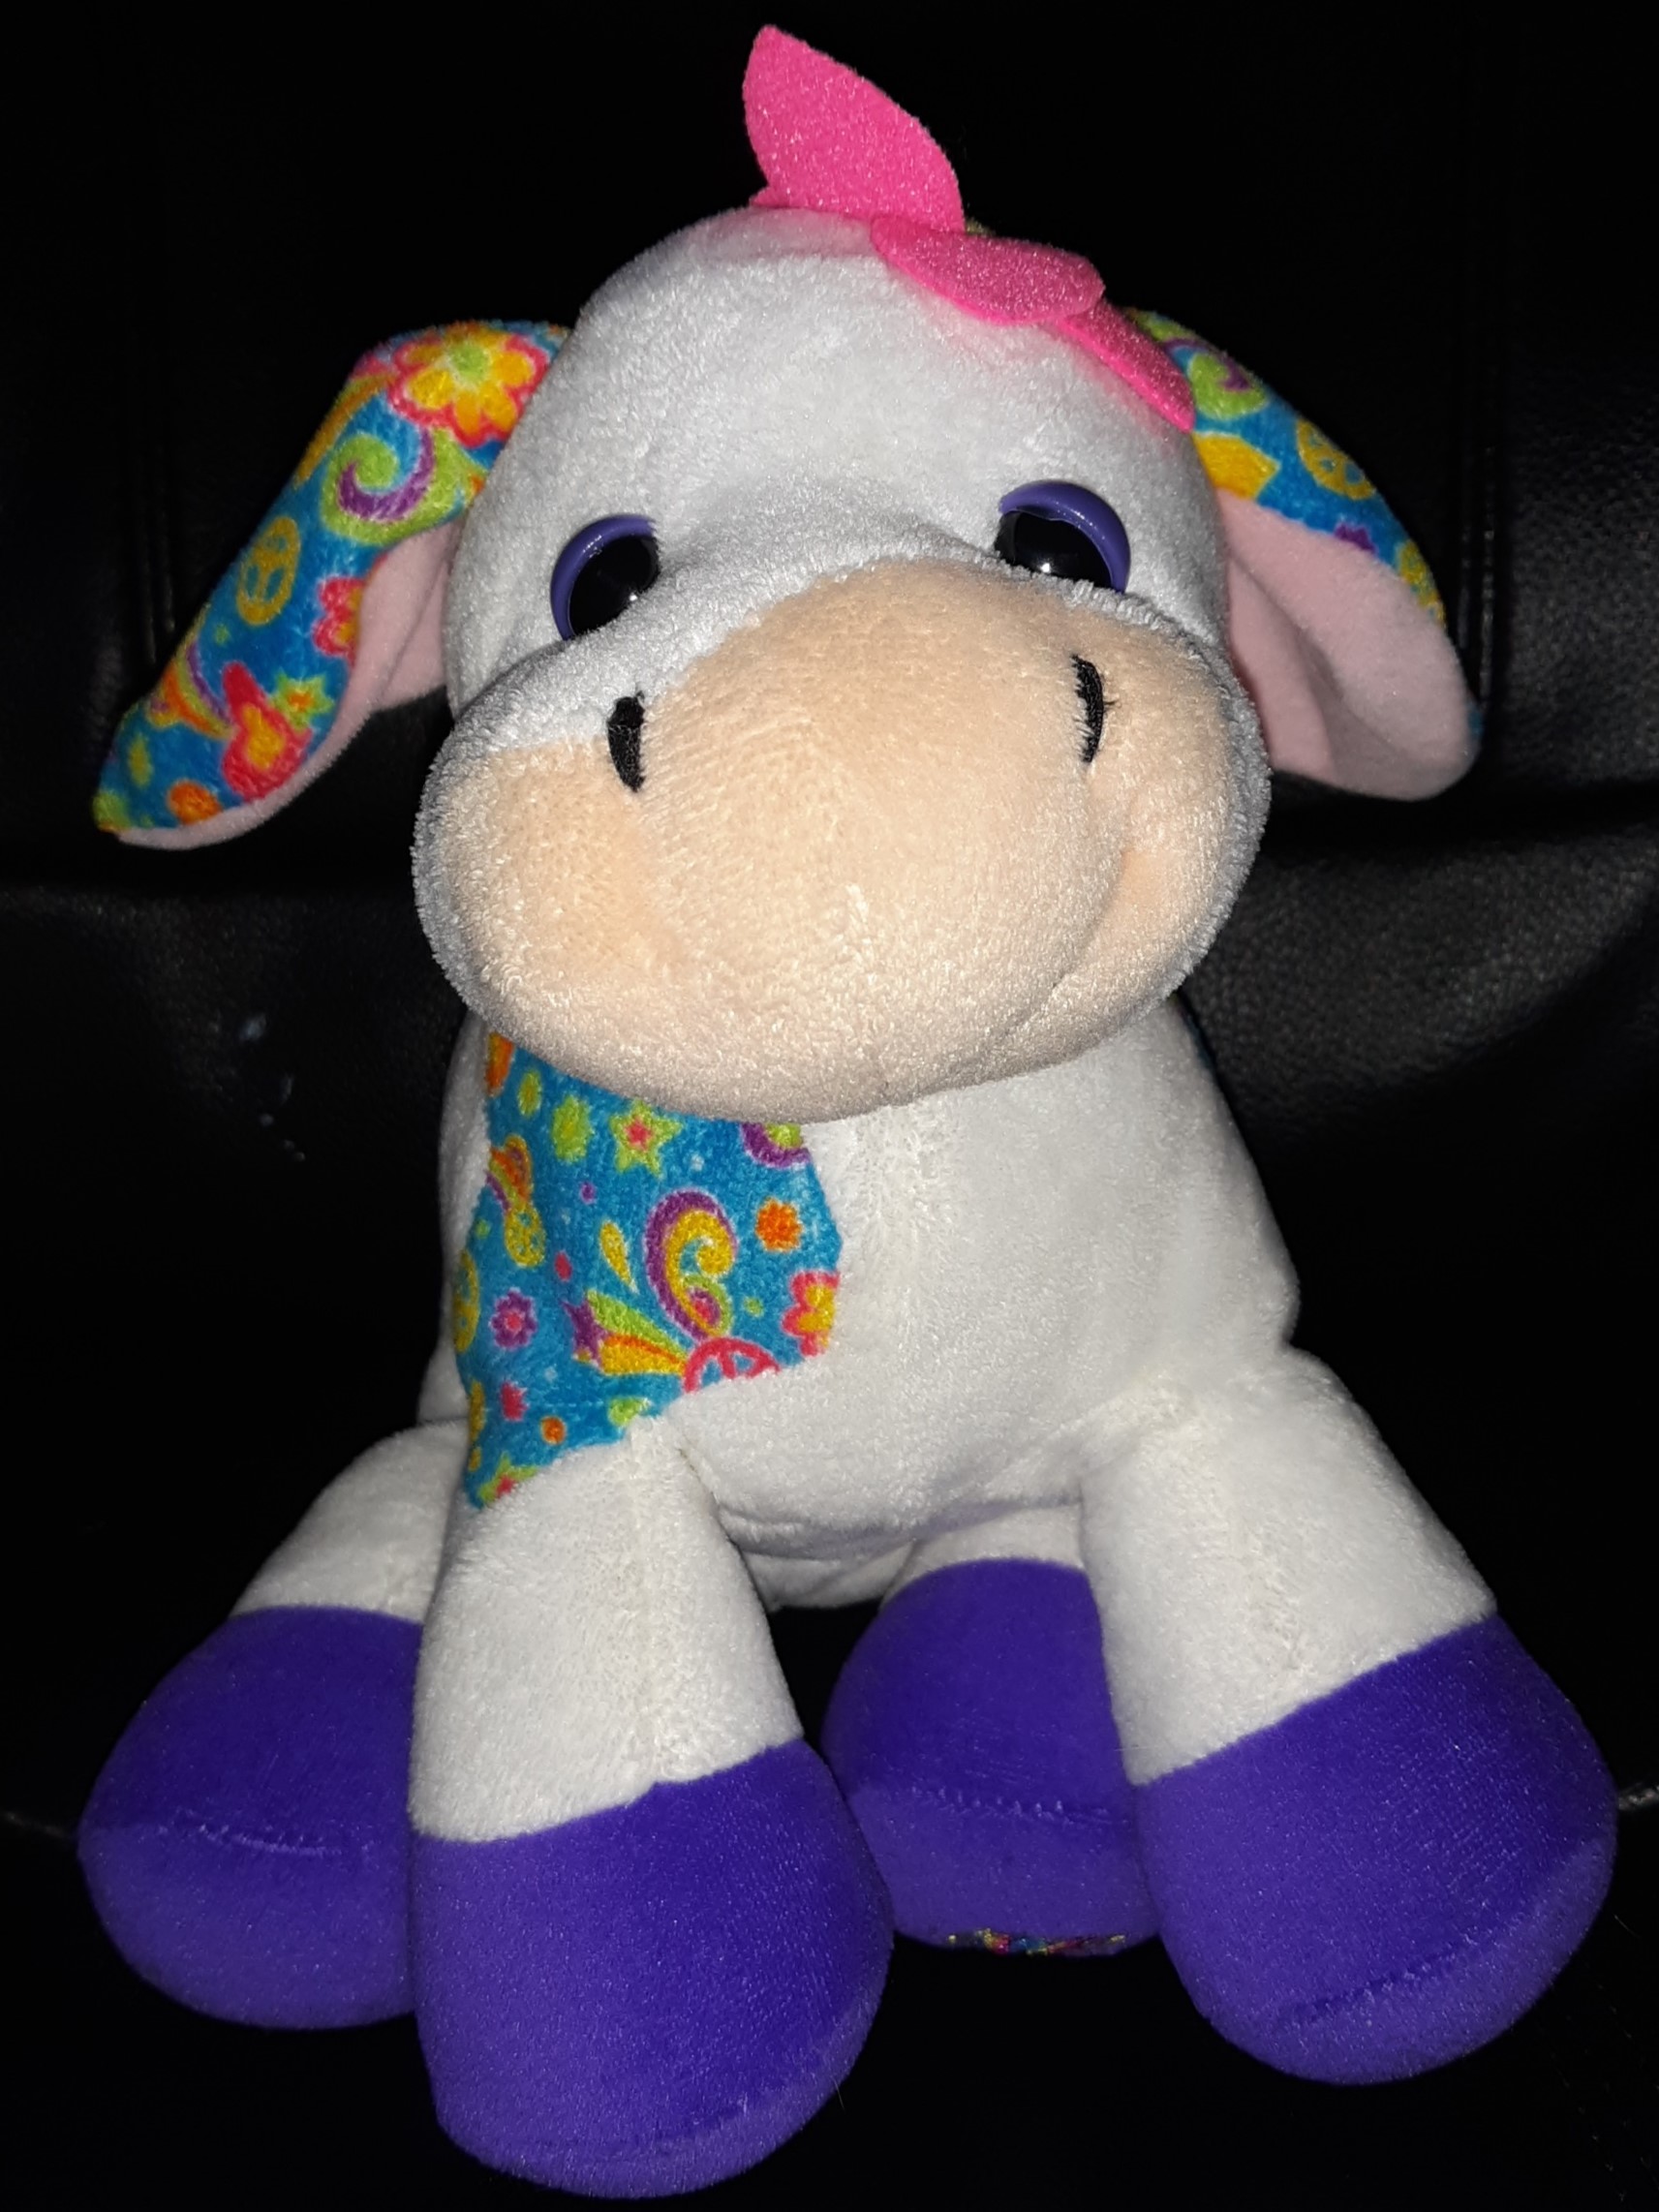 A doll of a white cow with purple hooves and patches of blue with a colorful pattern.